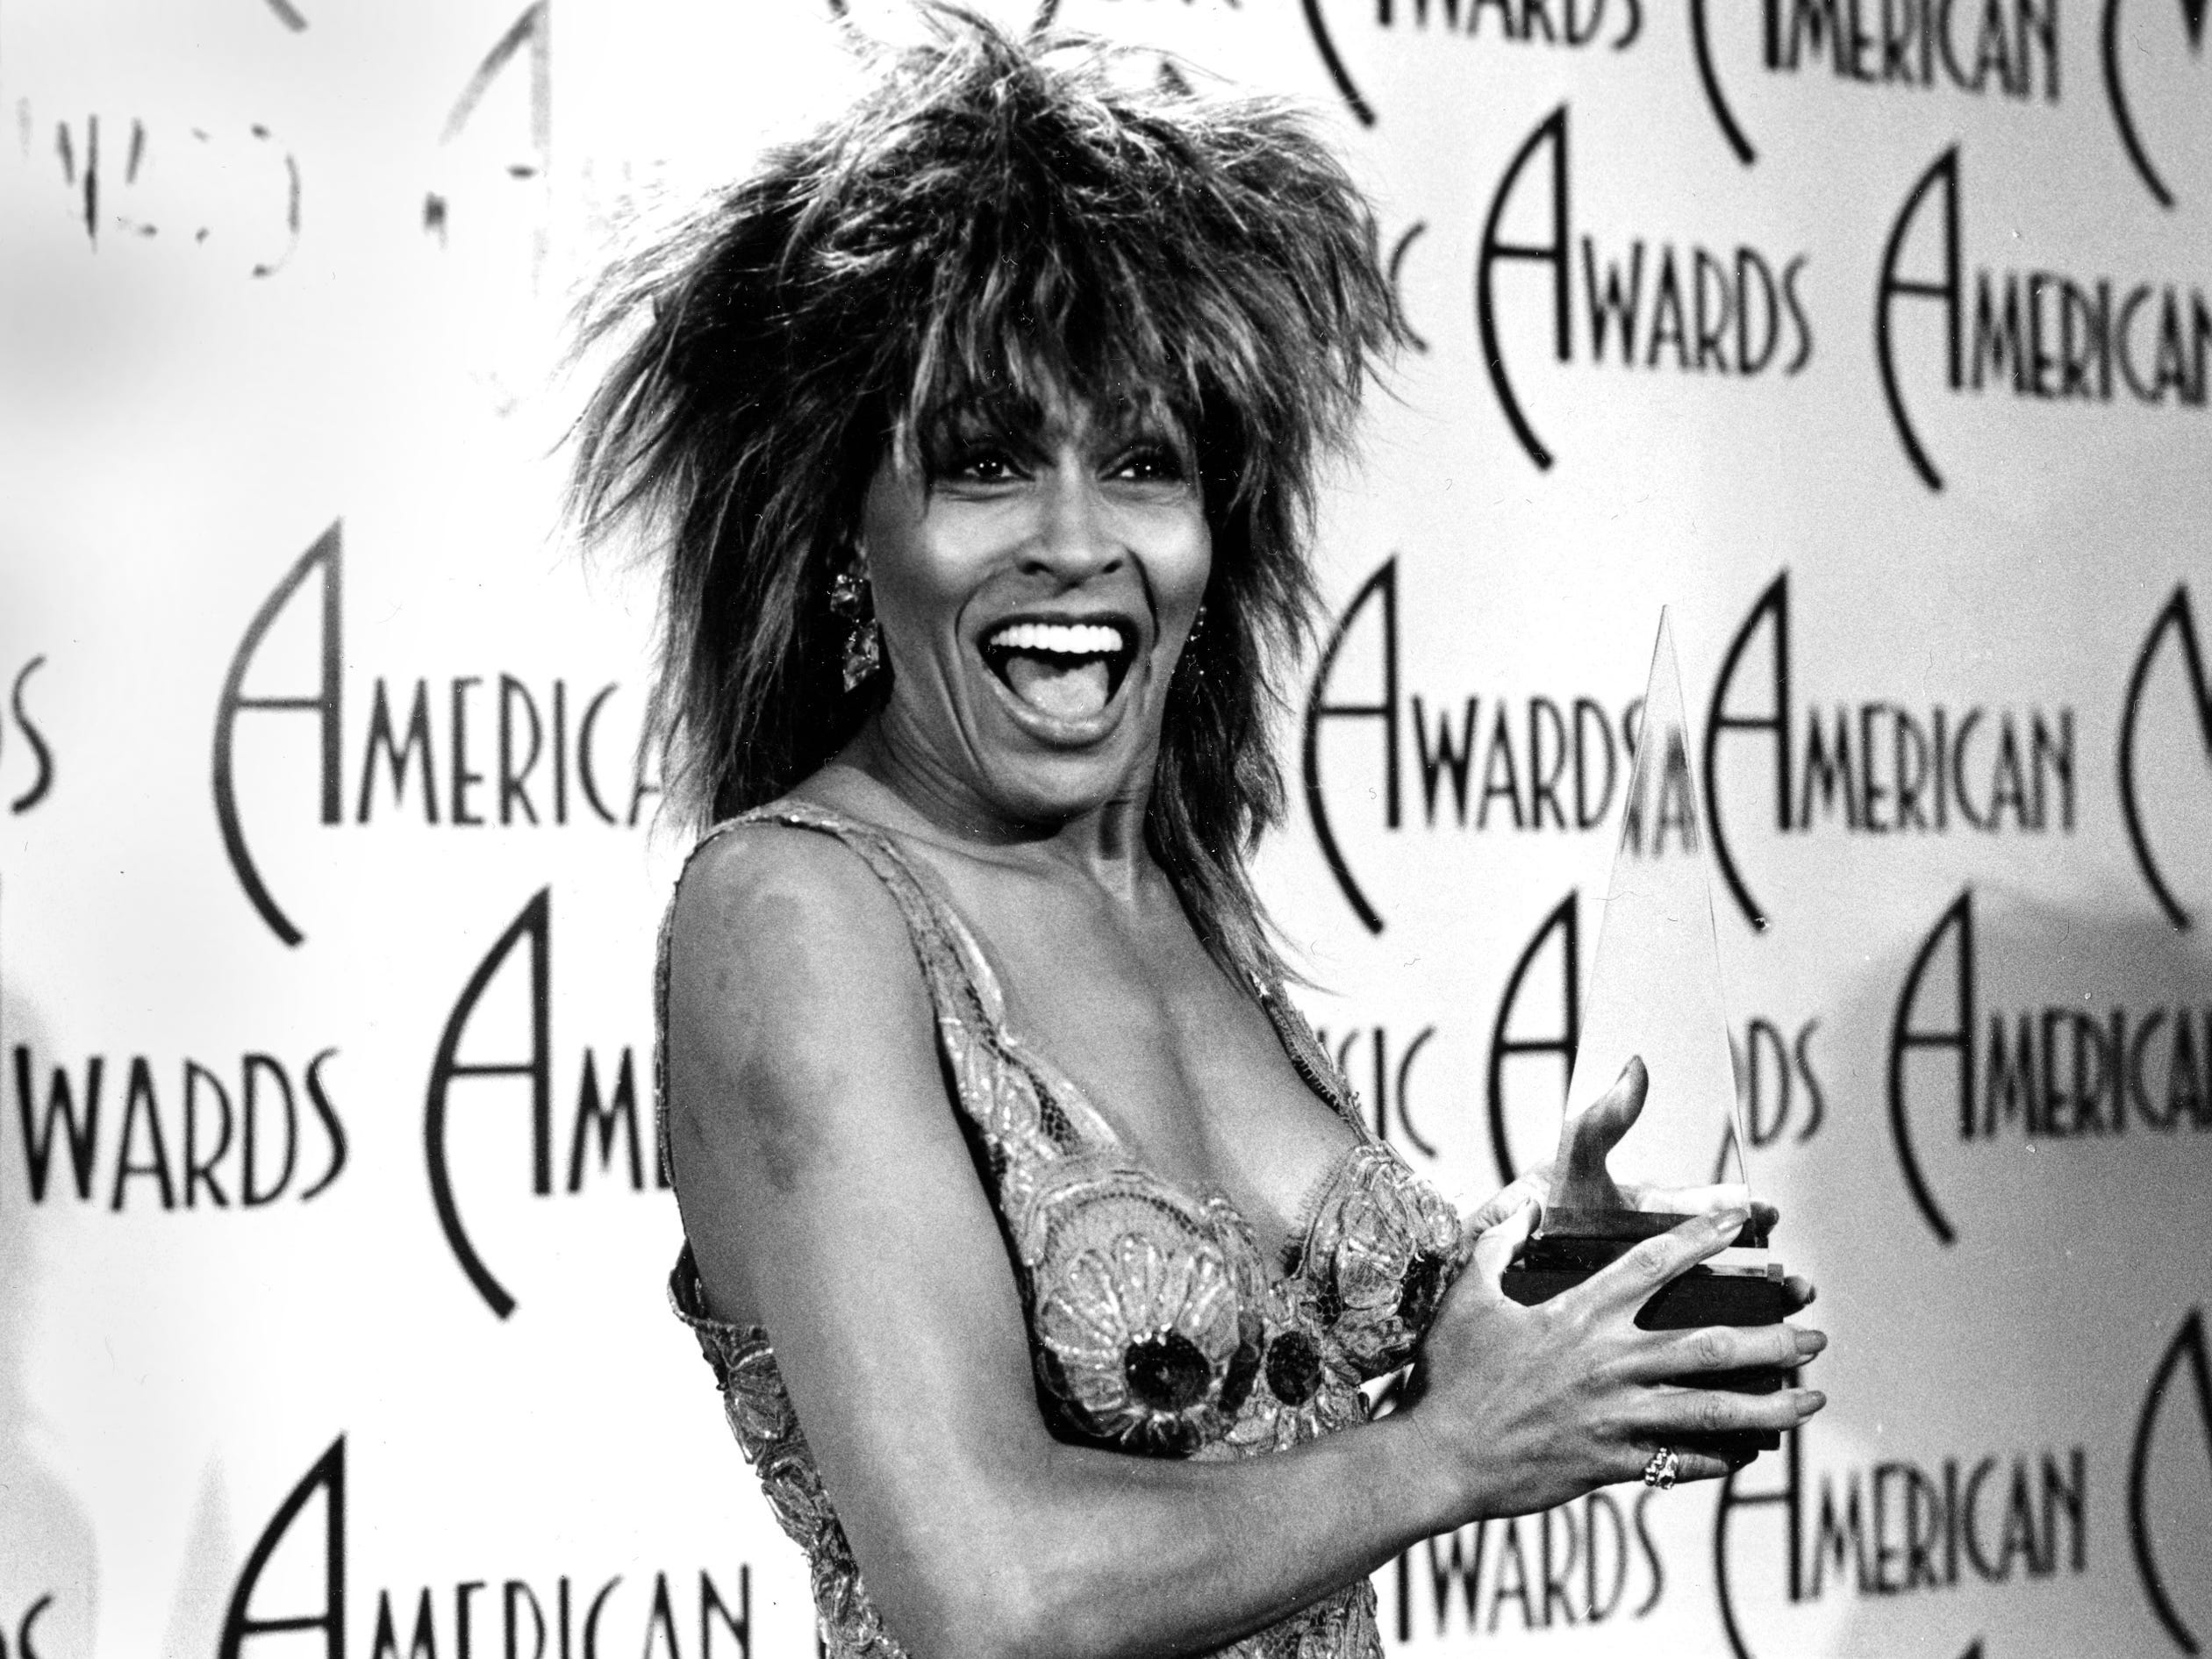 Tina turner poses with her award backstage at the 12th annual American Music Awards at the Shrine Auditorium in Los Angeles, Calif., January 28, 1985